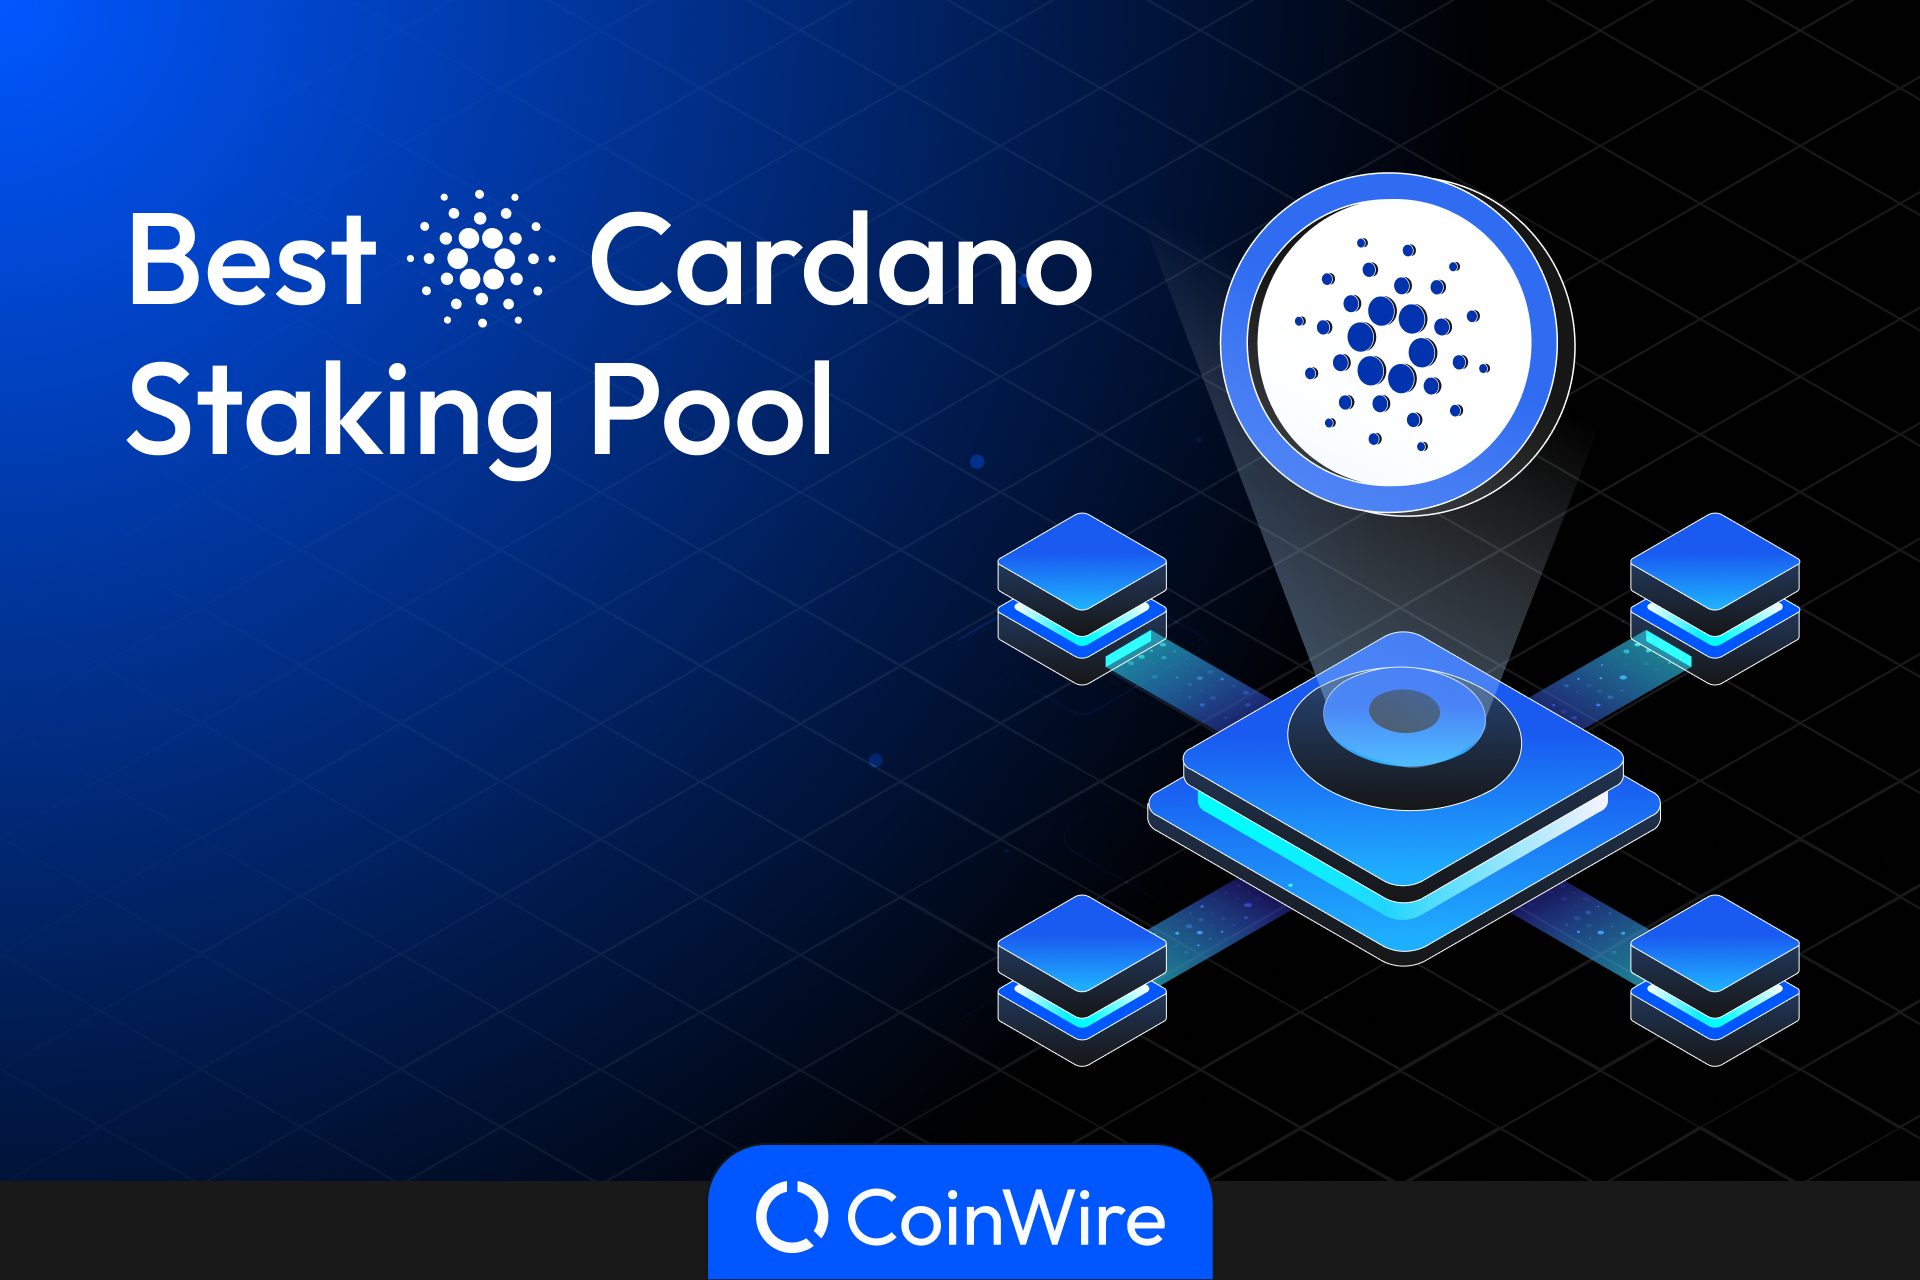 How to Choose a Cardano Staking Pool in 